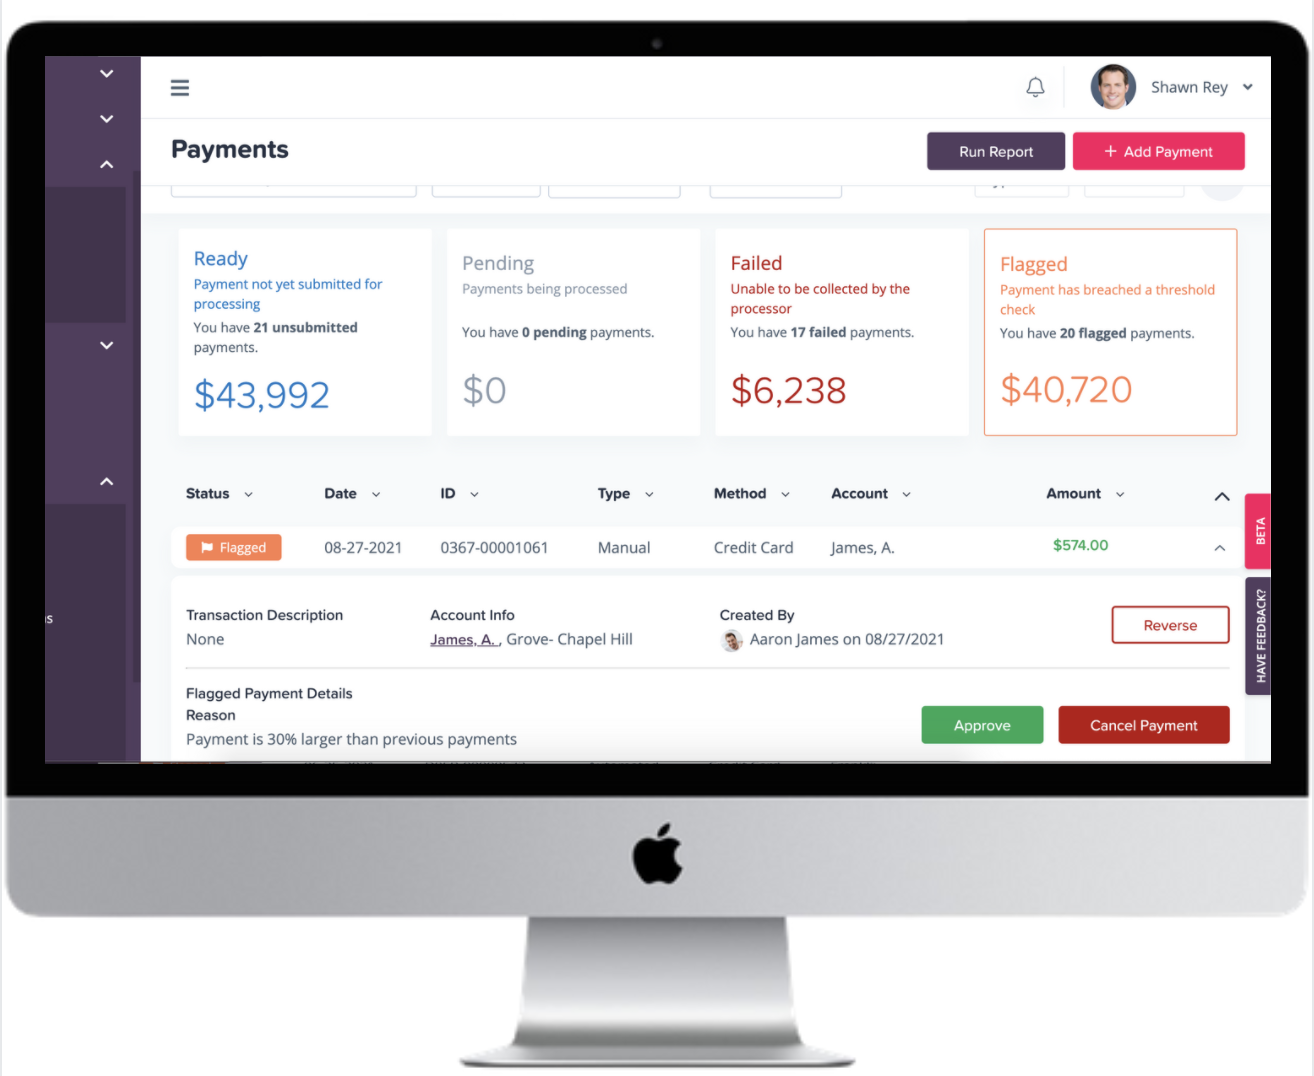 Manage payments using Kangarootime's payment dashboard. Monitor processed, flagged, and failed payments. Gain insight into your center's financial data with in-depth reporting.